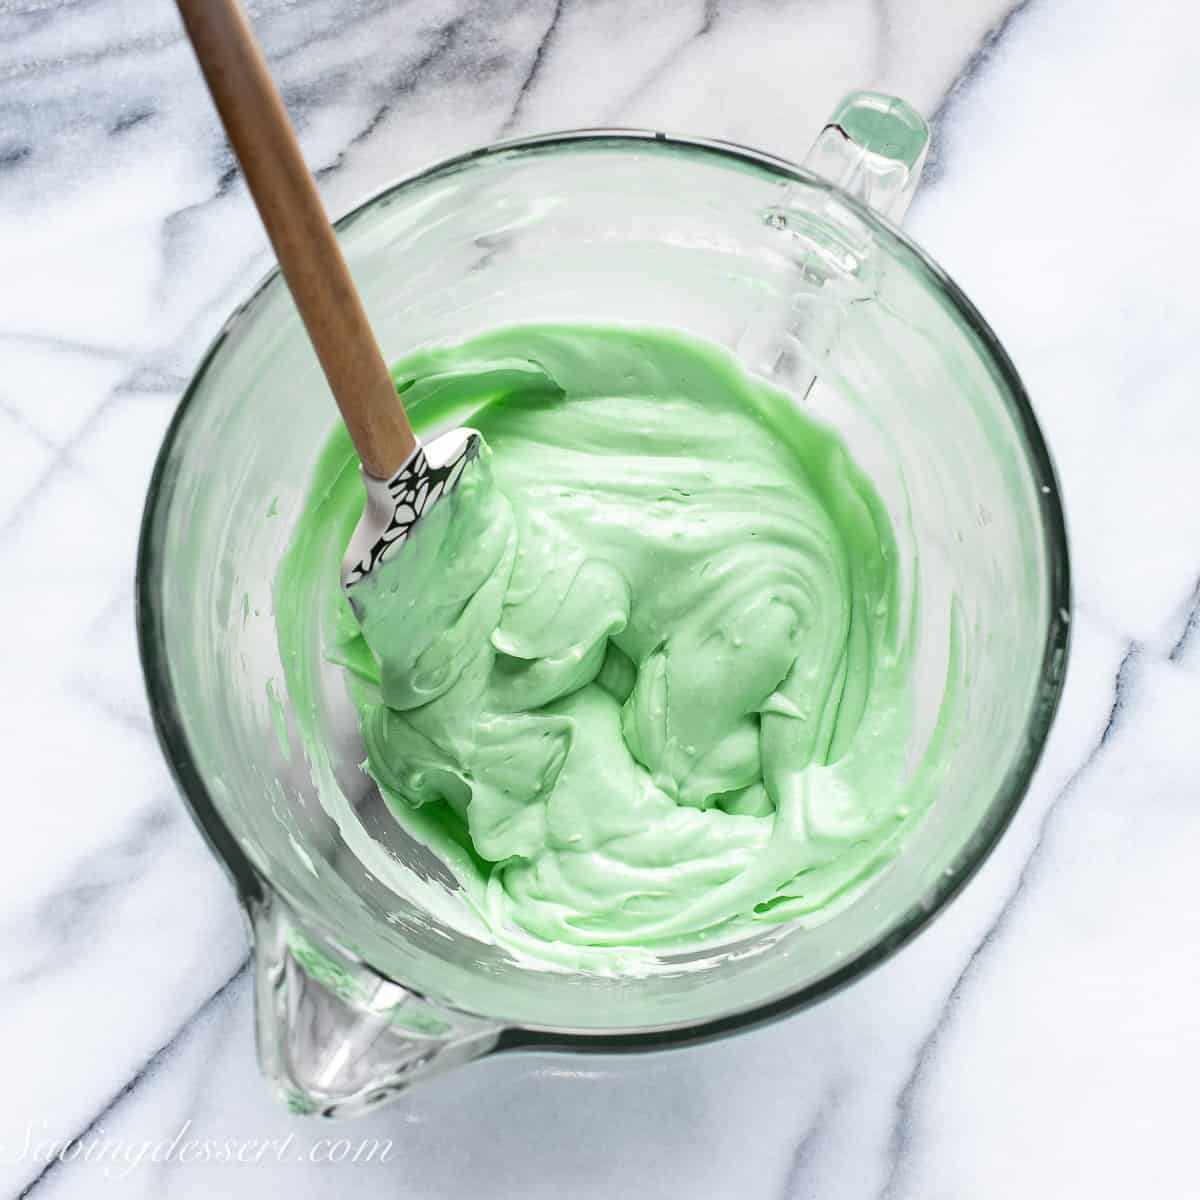 A mixing bowl filled with fluffy green pie filling